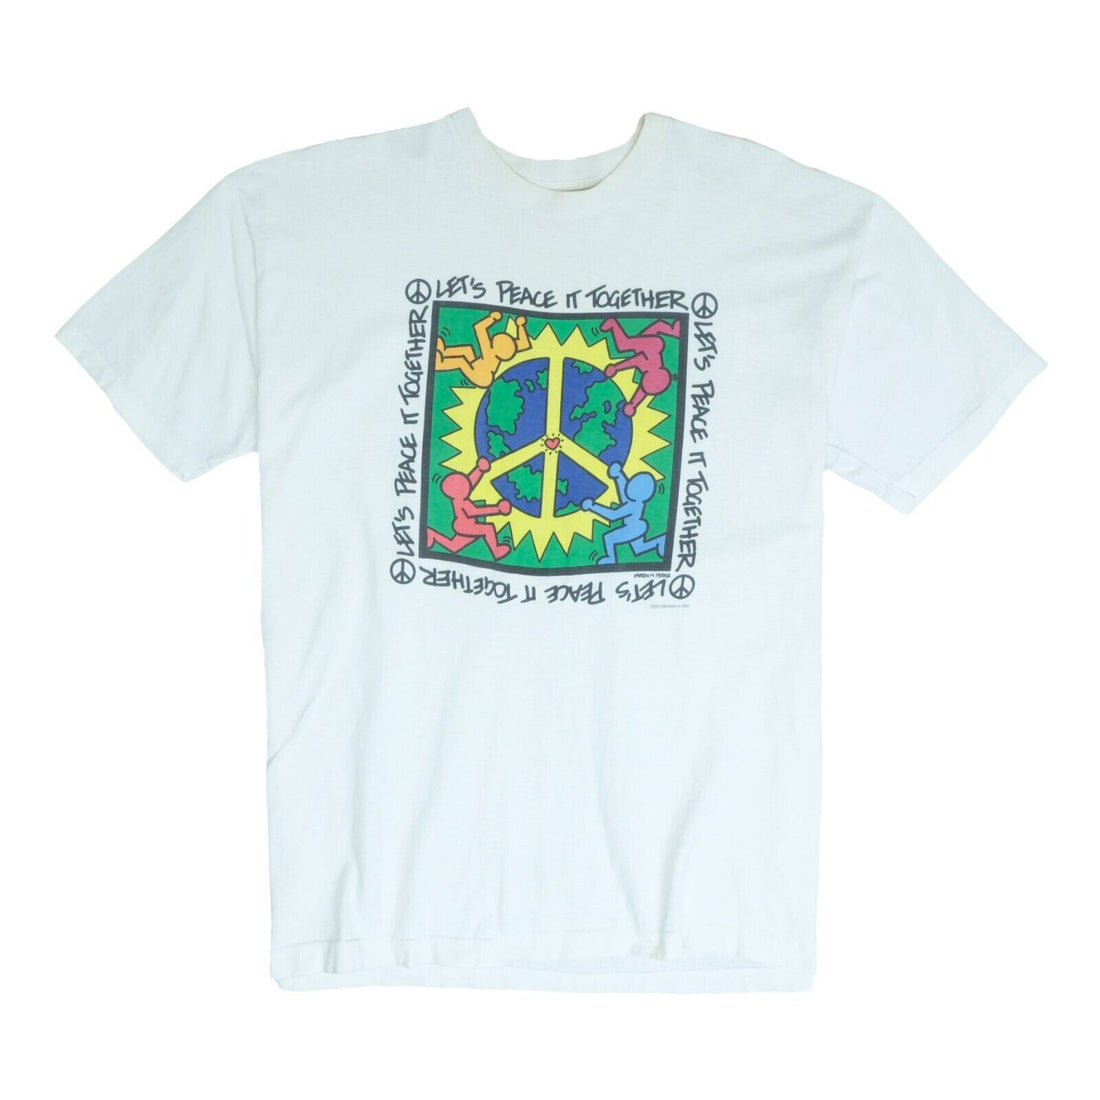 Vintage Let's Peace It Together T-Shirt Size 2XL Keith Haring Style Art 1993 90s